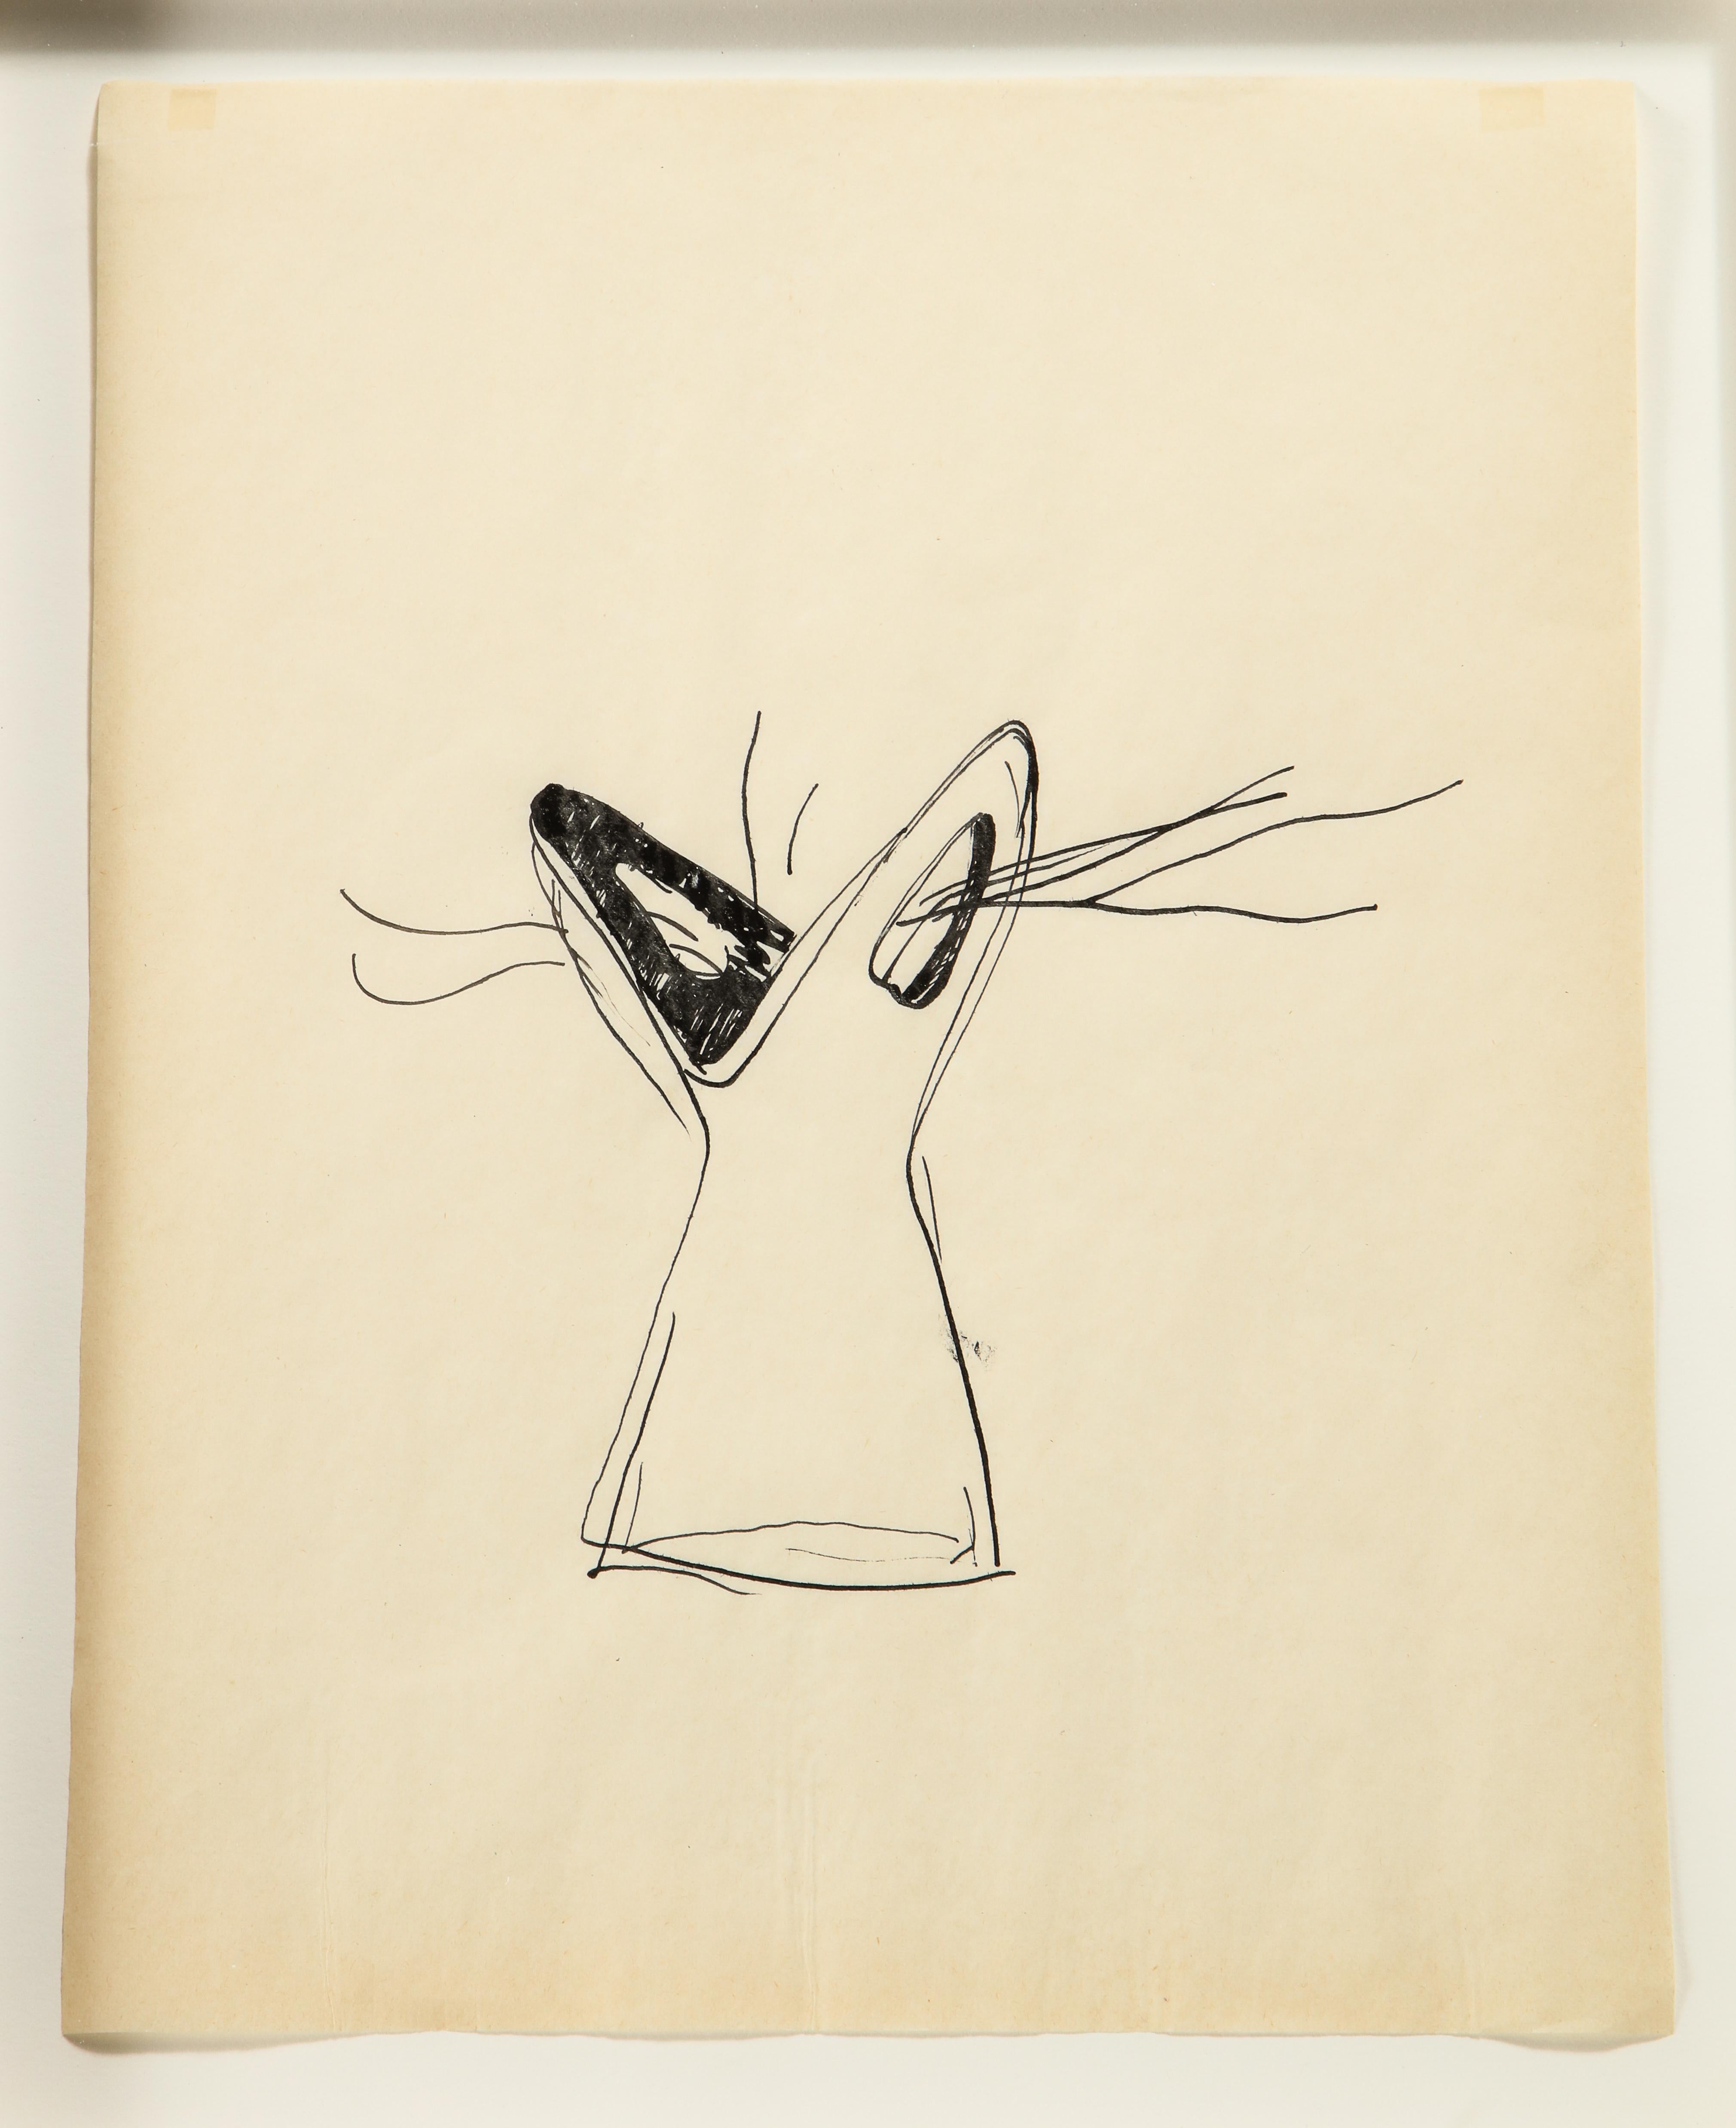 A wonderfully whimsical concept drawing of a vase. Authentication papers from the Gio Ponti archives provided with drawing.